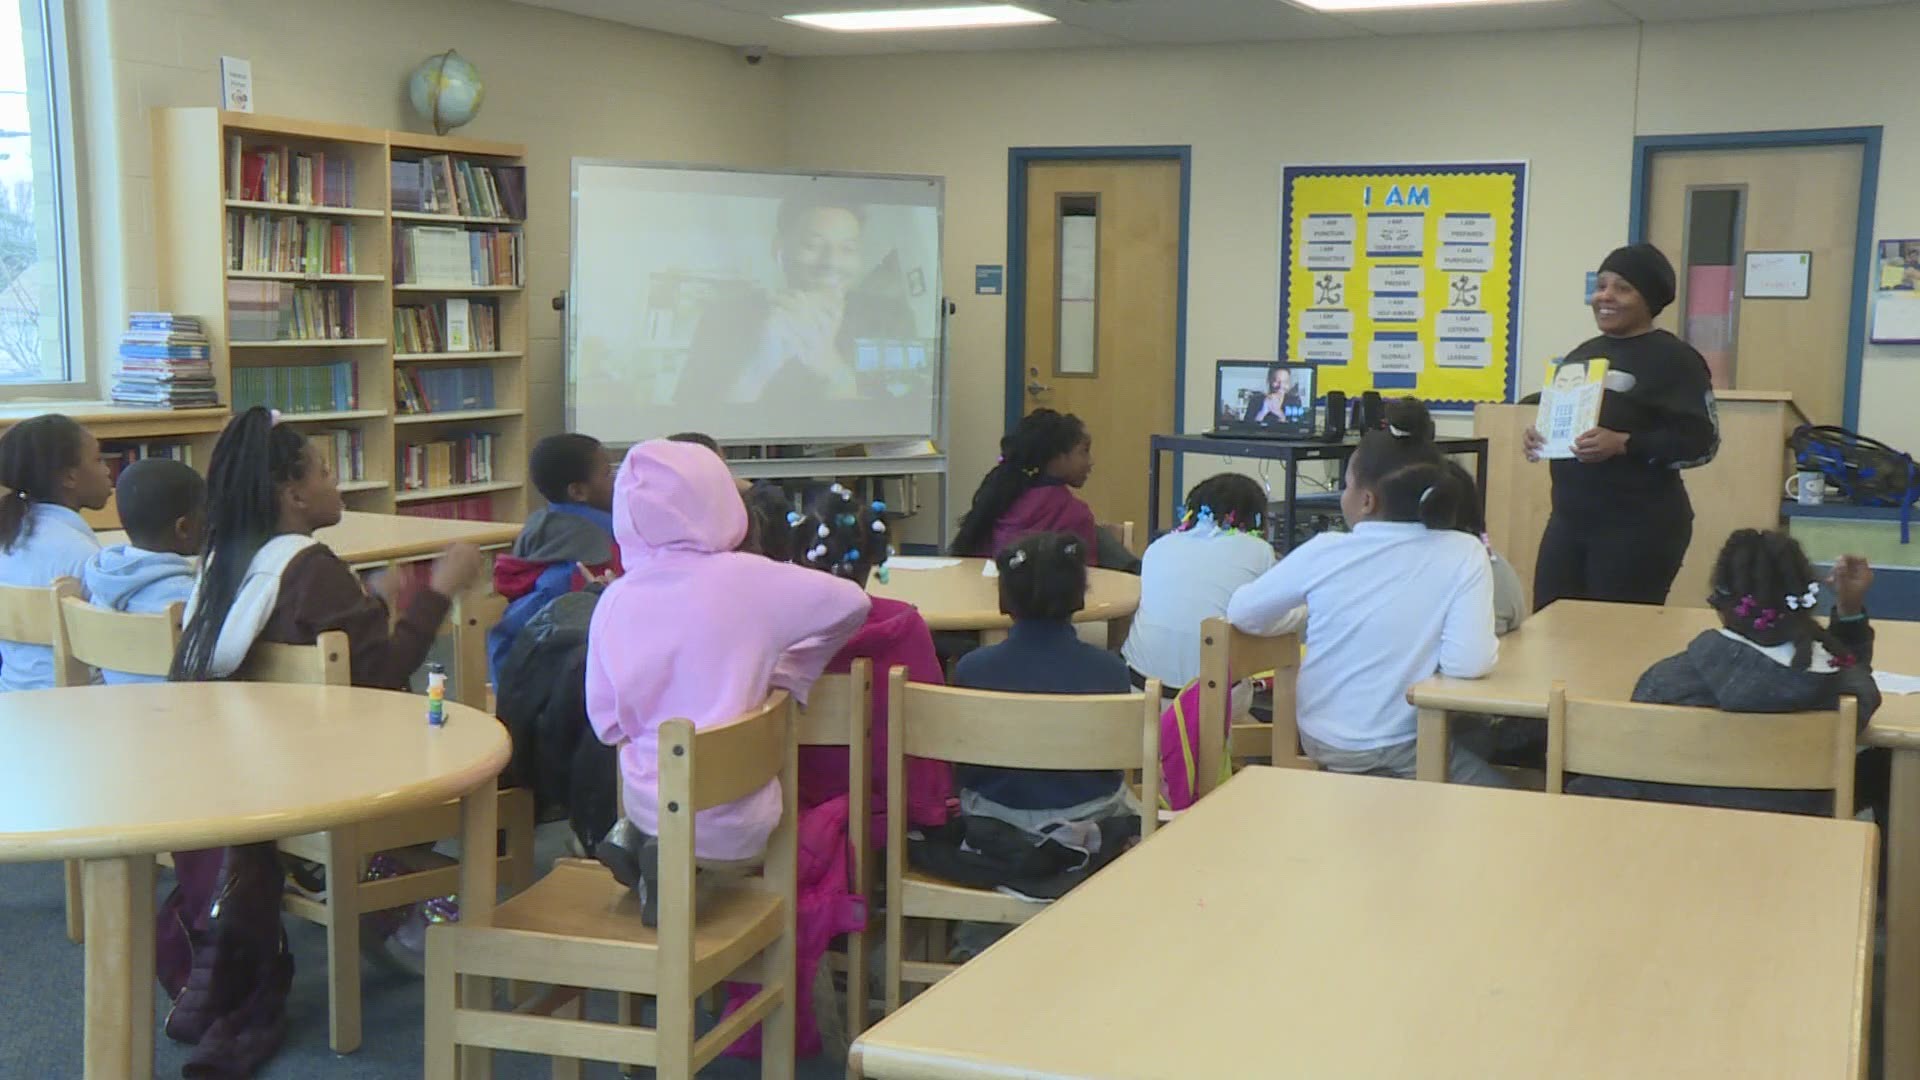 Right before all Ohio schools were closed due to coronavirus, 3News was invited to see how Cleveland third graders struggling to read were helped with technology.